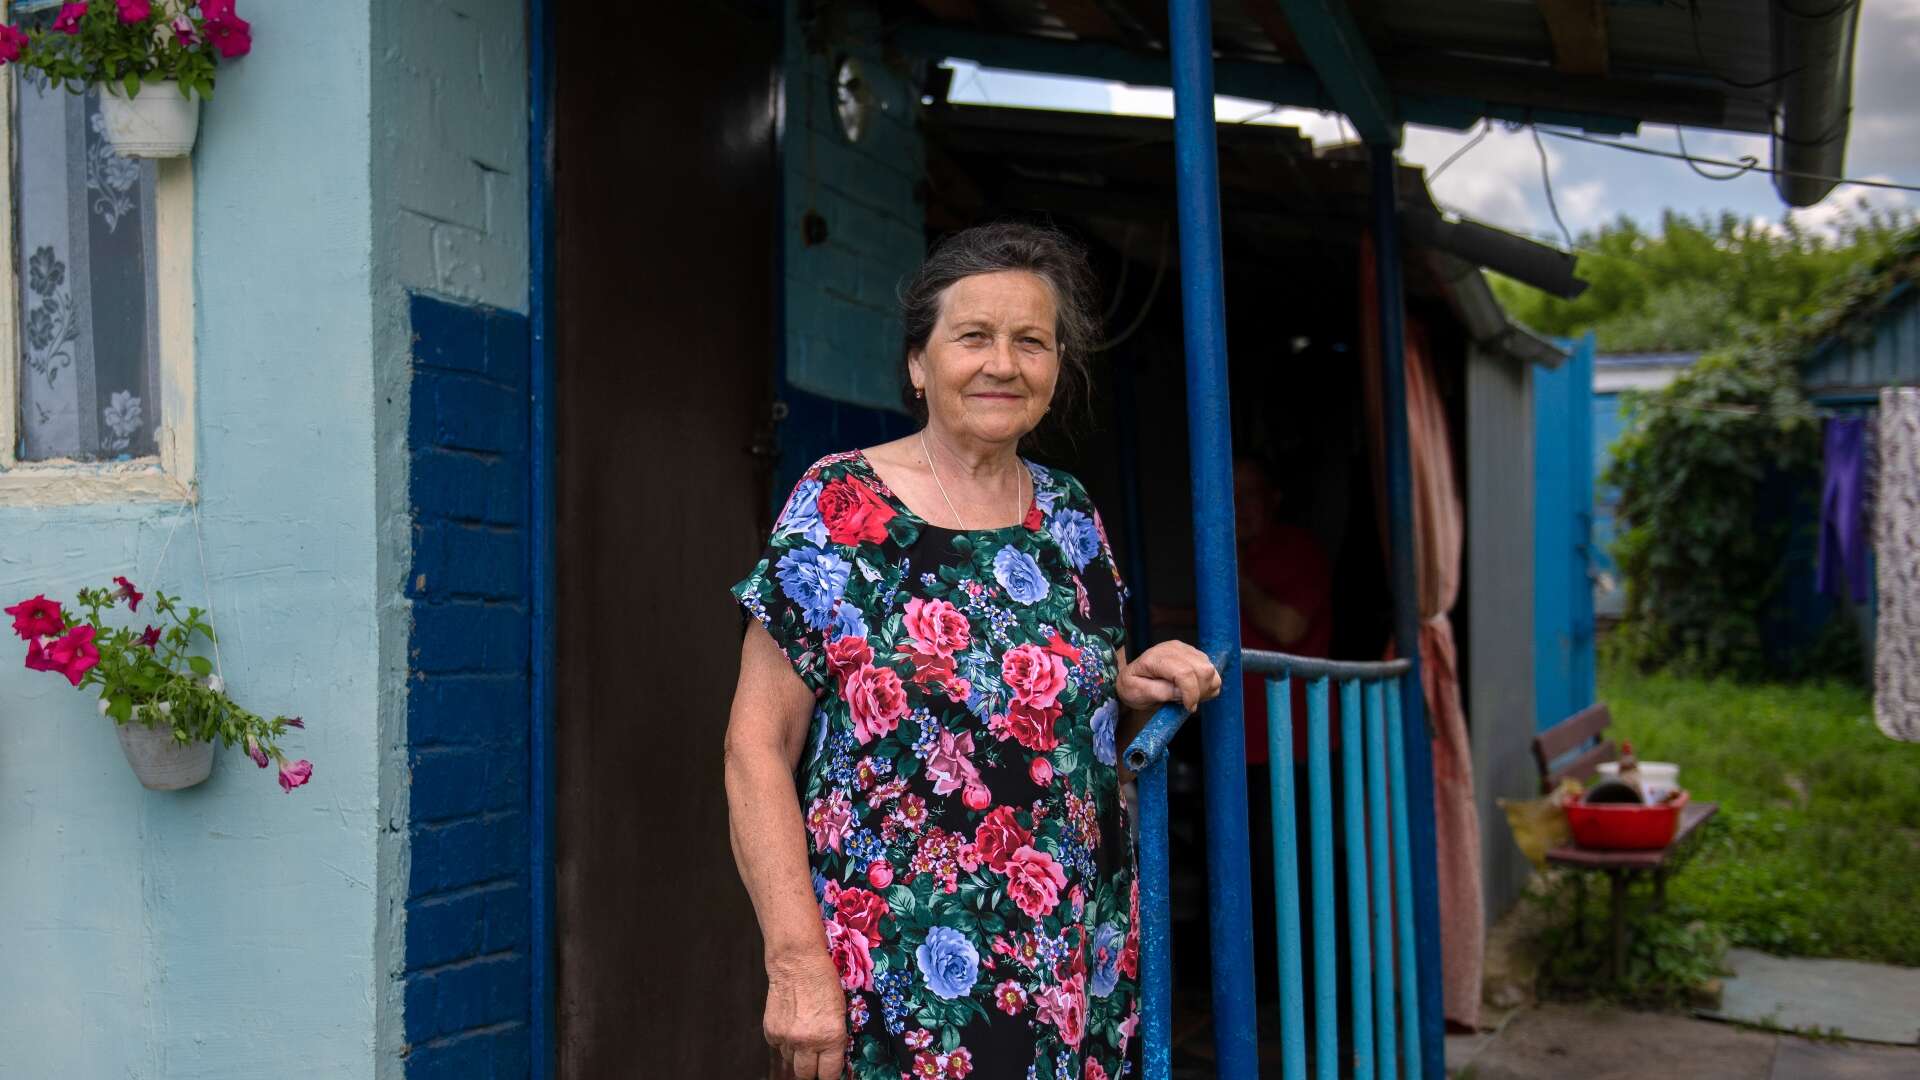 An elderly Ukrainain woman poses for a photo while standing in front of her home.